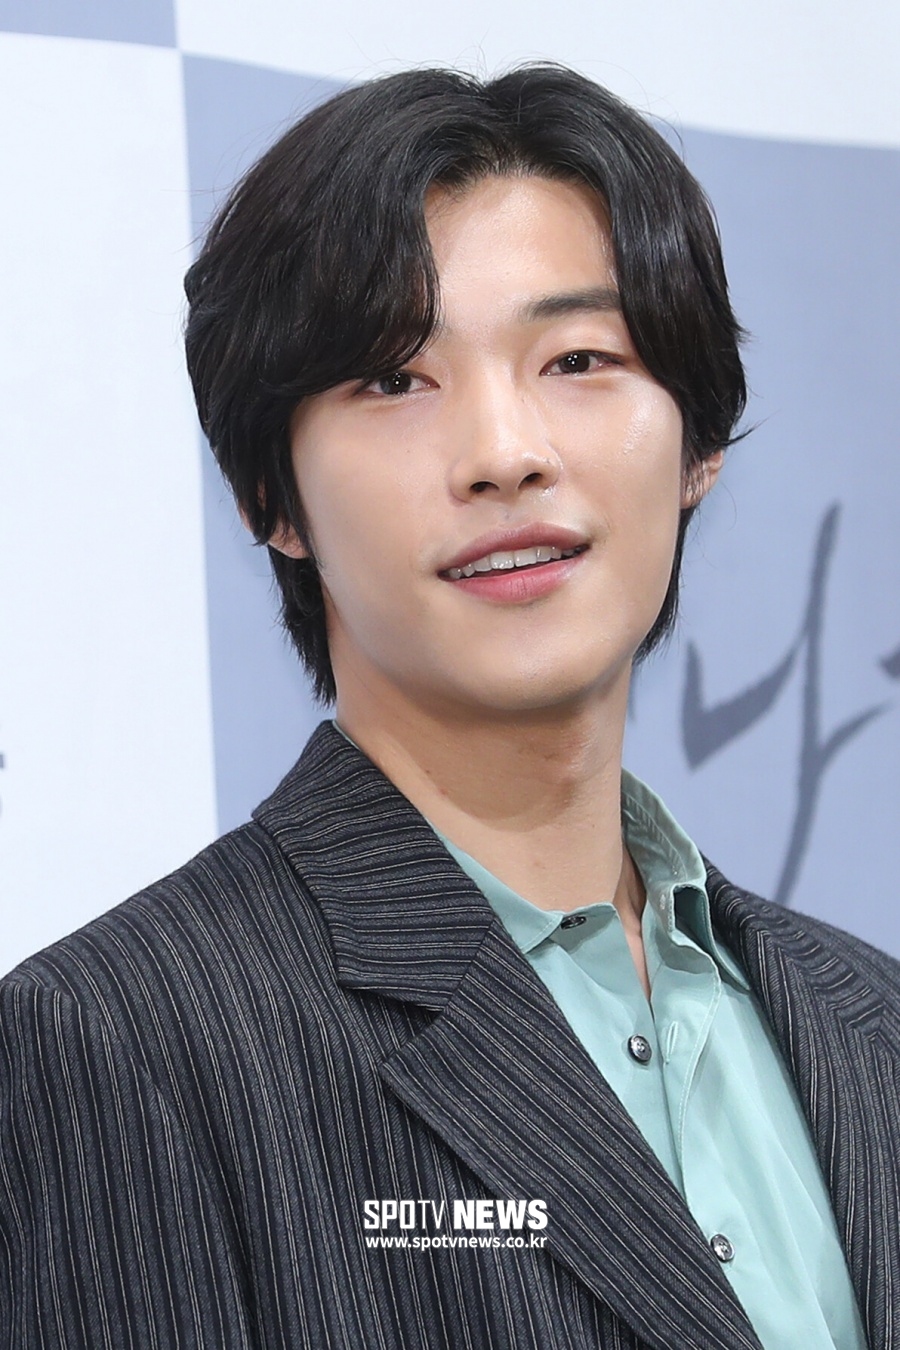 Actor Woo Do-hwan is Active duty Enlisted.Woo Do-hwan is Enlisted as Active duty on the 6th.After entering the Army Training Center on June 6, he will be assigned to the army after basic military training and will fulfill his duty of defense with Active duty.Woo Do-hwan, who recently appeared on SBSs Golden Drama The King - Eternal Monarch, says goodbye to fans for a while after this work.On the 5th day of Enlisted, he showed a farewell party with Lee Min-ho, who appeared together in The King - Eternal Monarch with a shaved photo of his hair.Lee Min-ho called the name of The King and said, Infant will be the first gun in the world. Woo Do-hwan replied, I will come and be your Majesty.Woo Do-hwan posted a letter on SNS and revealed his intention to be Enlisted. Woo Do-hwan said, I was happy with every piece of love you sent me.Thank you for watching my twenties and loving me. Thanks to that, I was able to spend my 20s so happy. I thank the fans and said, I hope you are healthy and happy in a very difficult time.I will go well and greet you in a good way. I love and appreciate it enough to express it in any word. Woo Do-hwan was born in 1992 and debuted in 2016 as KBS2 Drama The Man Who Lives in My House.Since then, he has been known as the 20th representative actor of Korea through various works from historical dramas such as KBS2 Mad Dog, MBC Great Temptator, JTBC My Country to Melody.Recently, he appeared in Kim Eun-sooks The King - Lord of Eternity.=